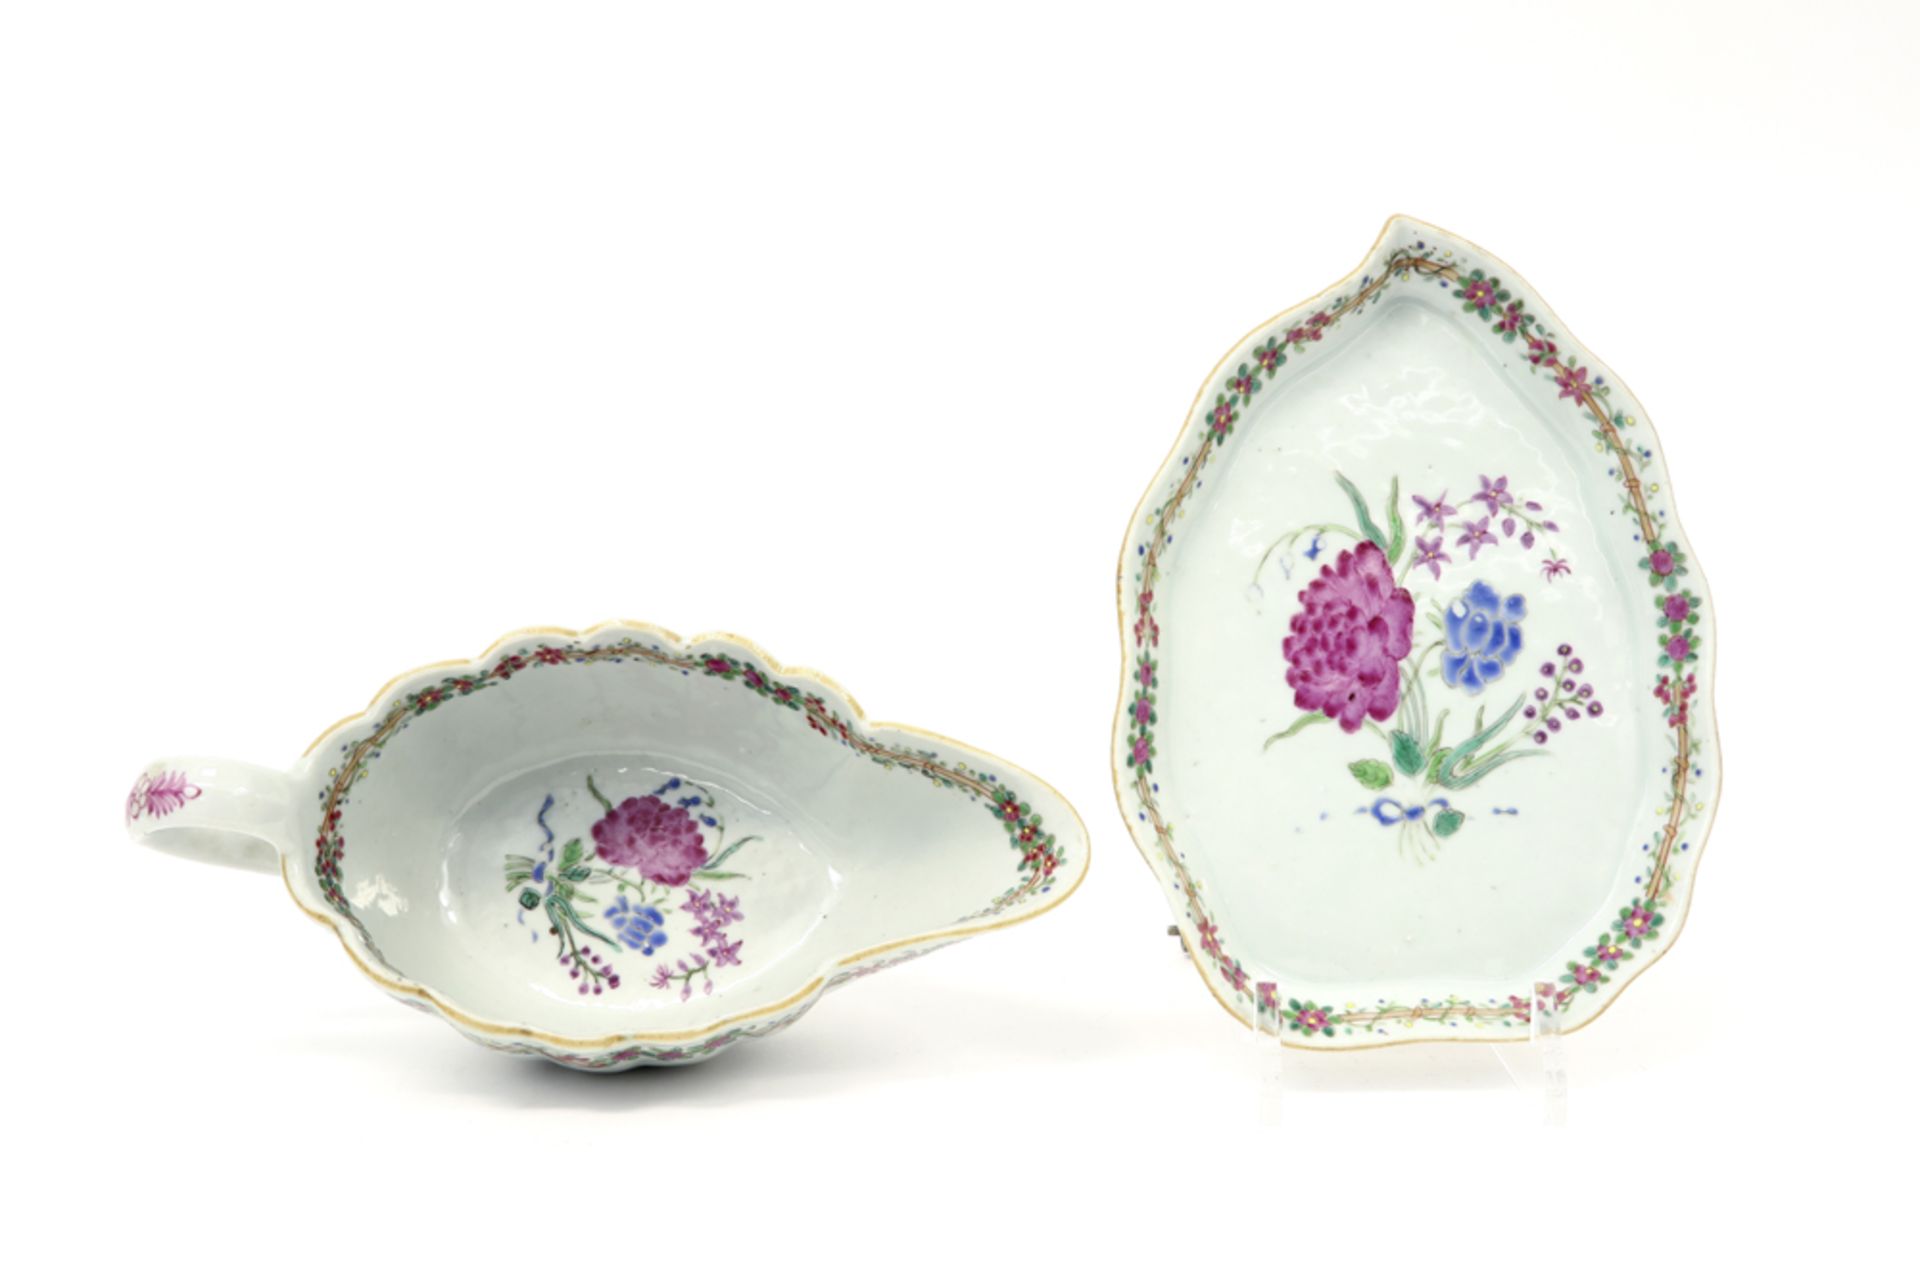 18th Cent. Chinese sauce boat with its matching dish in porcelain with 'Famille Rose' decor || - Image 3 of 4